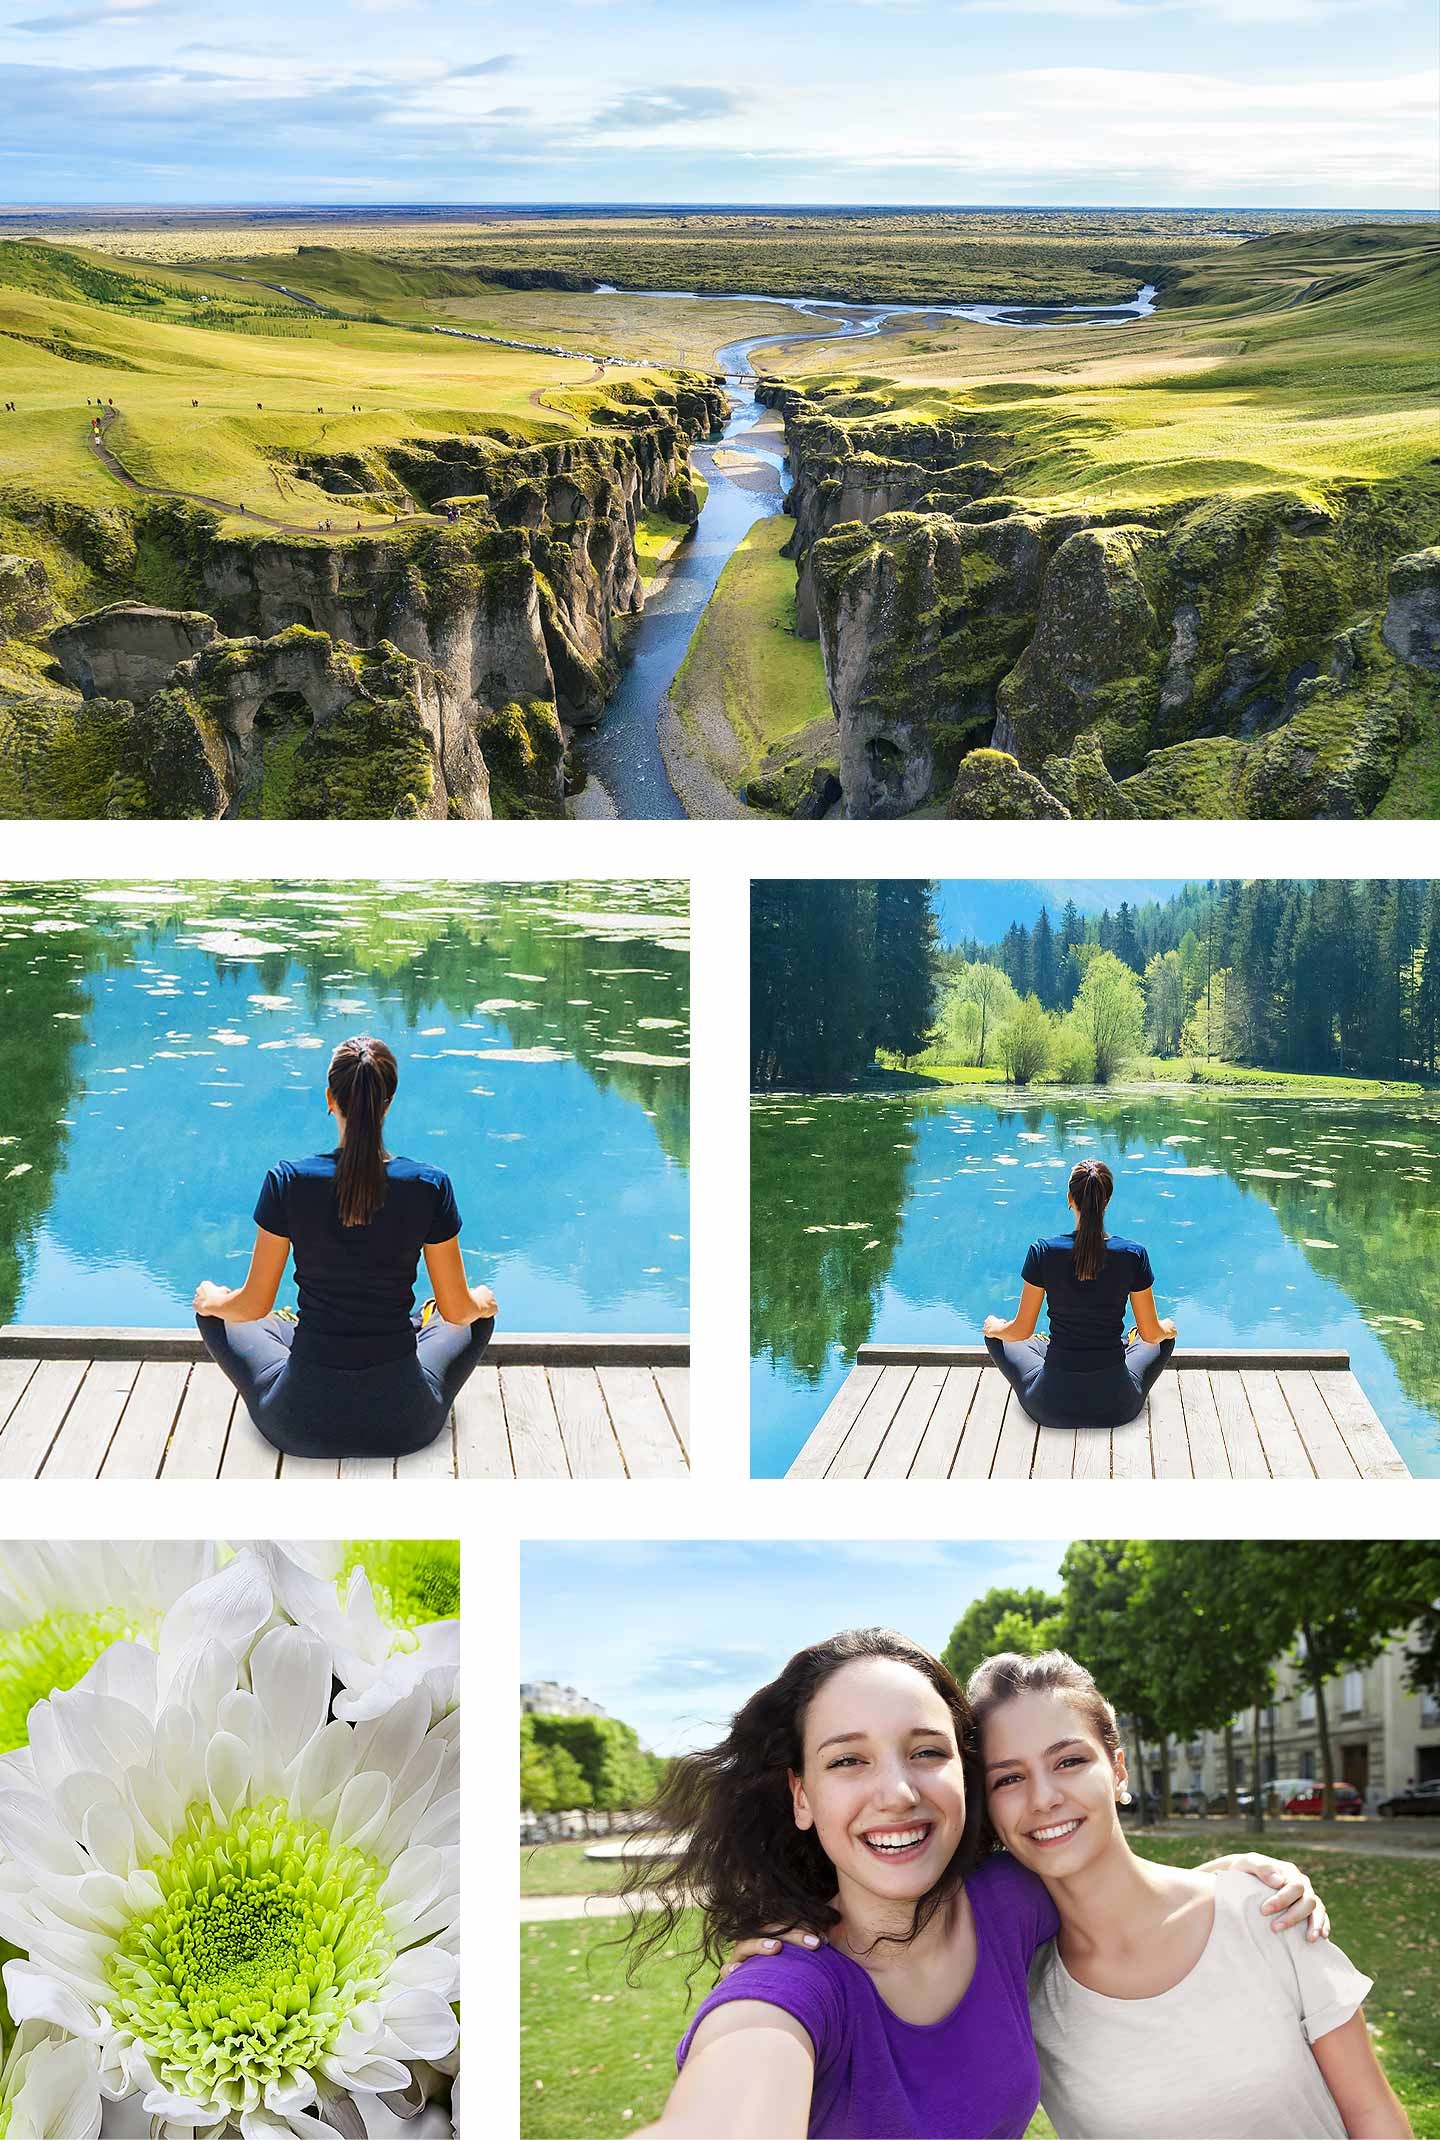 Five images are shown, each image highlighting what each camera is capable of. A beautiful landscape of a river flowing through a valley was taken by the 50MP Main camera. A portrait of a woman sitting, meditating at a dock by the waters, dressed in black and turned around, is shown twice with one image showing a wider angle to highlight the 5MP Ultra Wide camera. A detailed image of a single white flower was taken by the 2MP Macro camera. A selfie of two smiling women was taken by the 13MP Front camera.